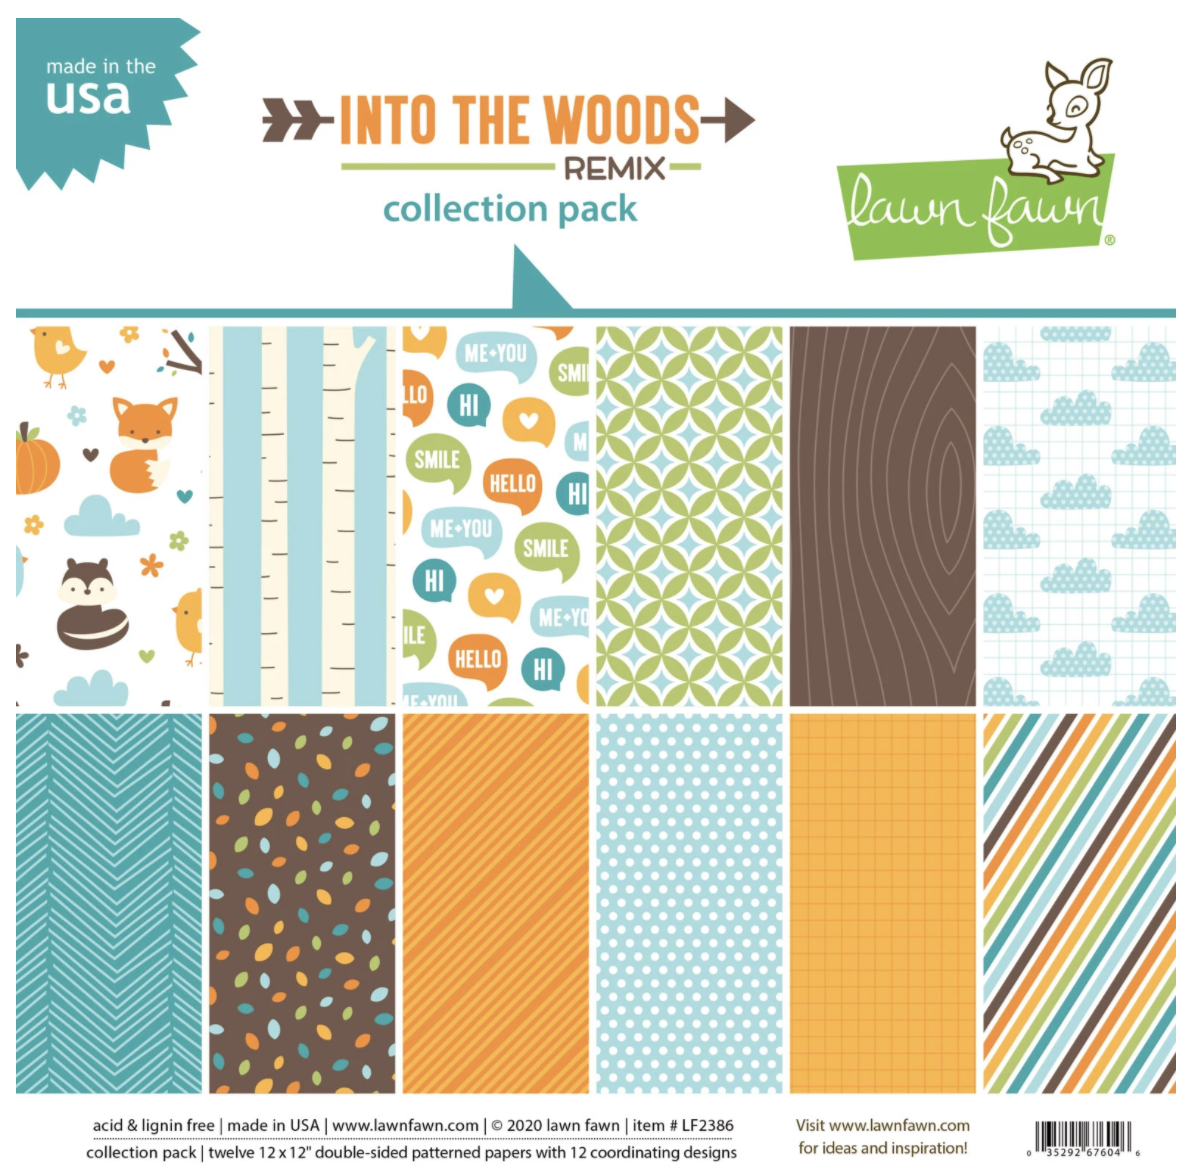 Lawn Fawn, Into the Woods Remix Collection Pack